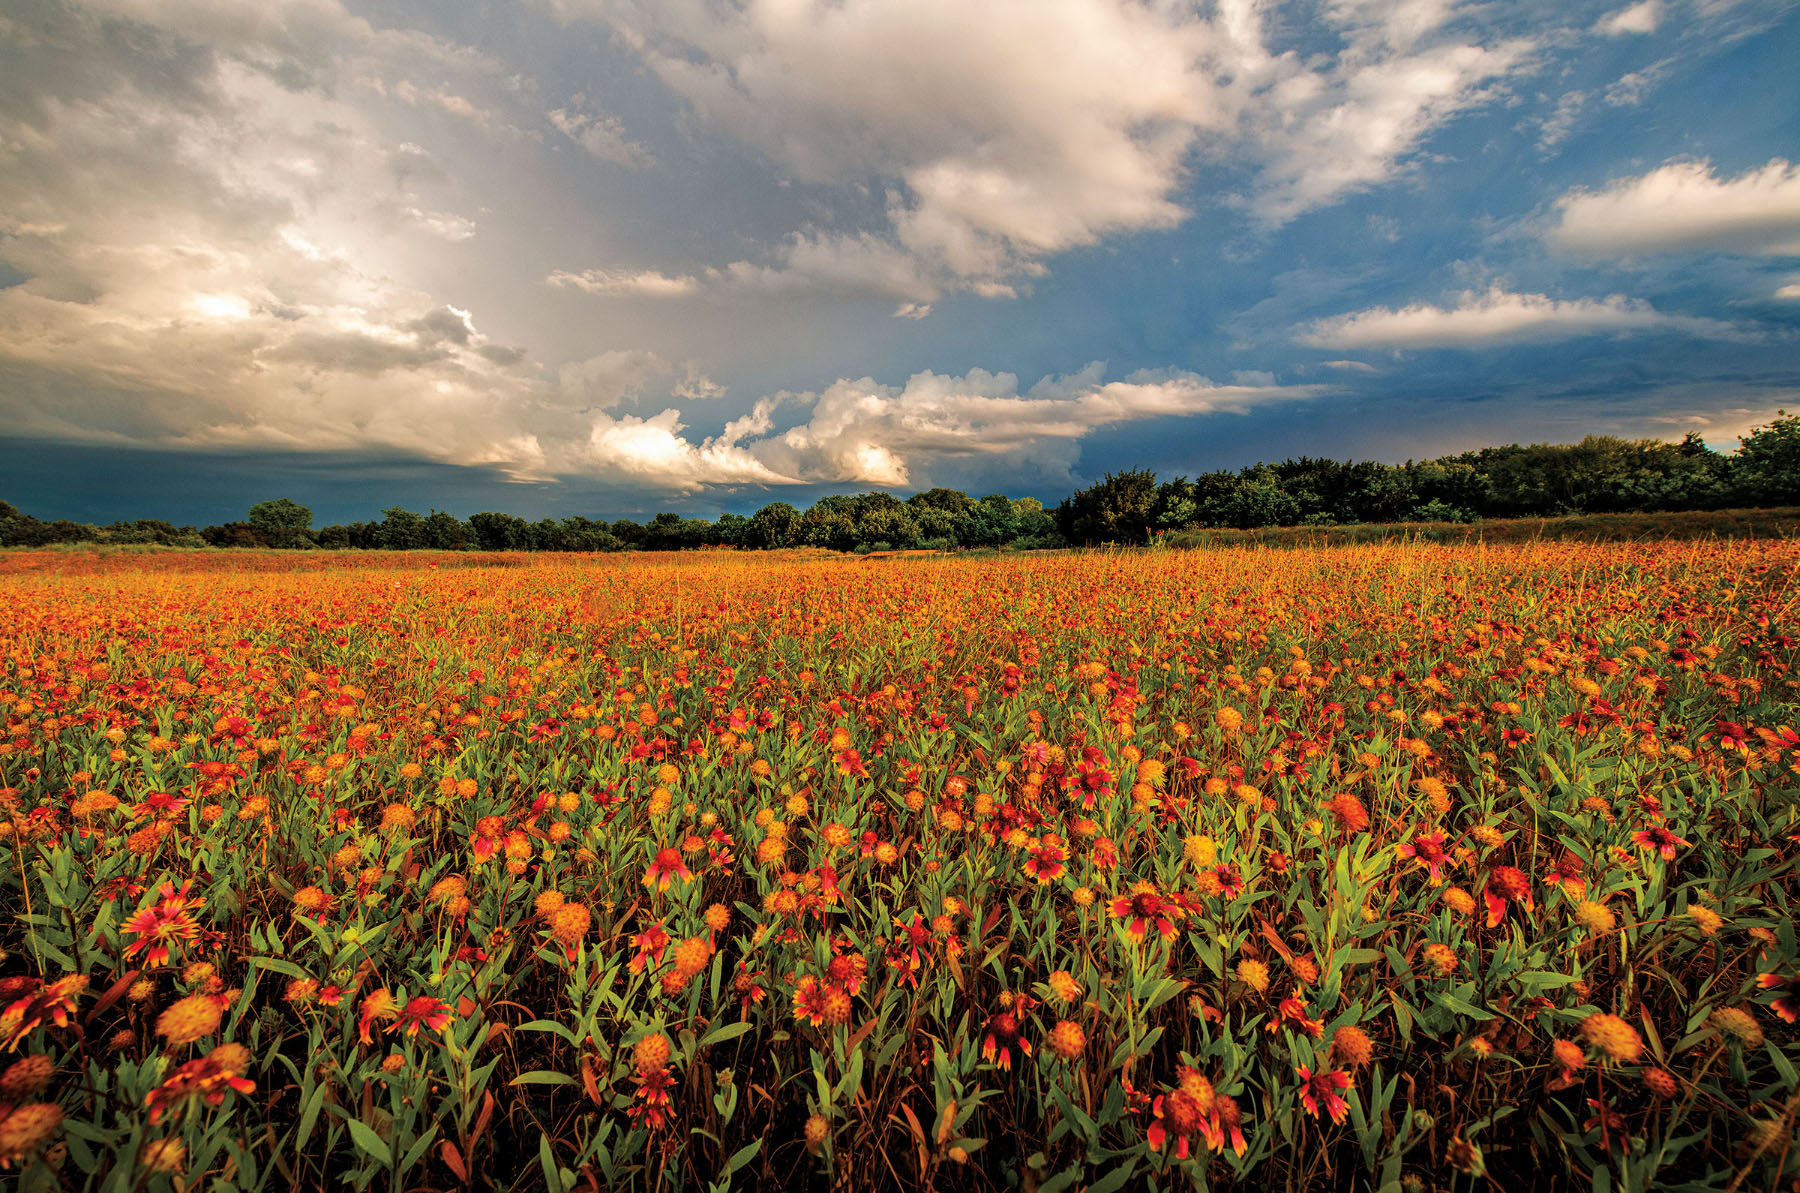 Bright blue sky and white clouds look over a large field of red and orange wildflowers